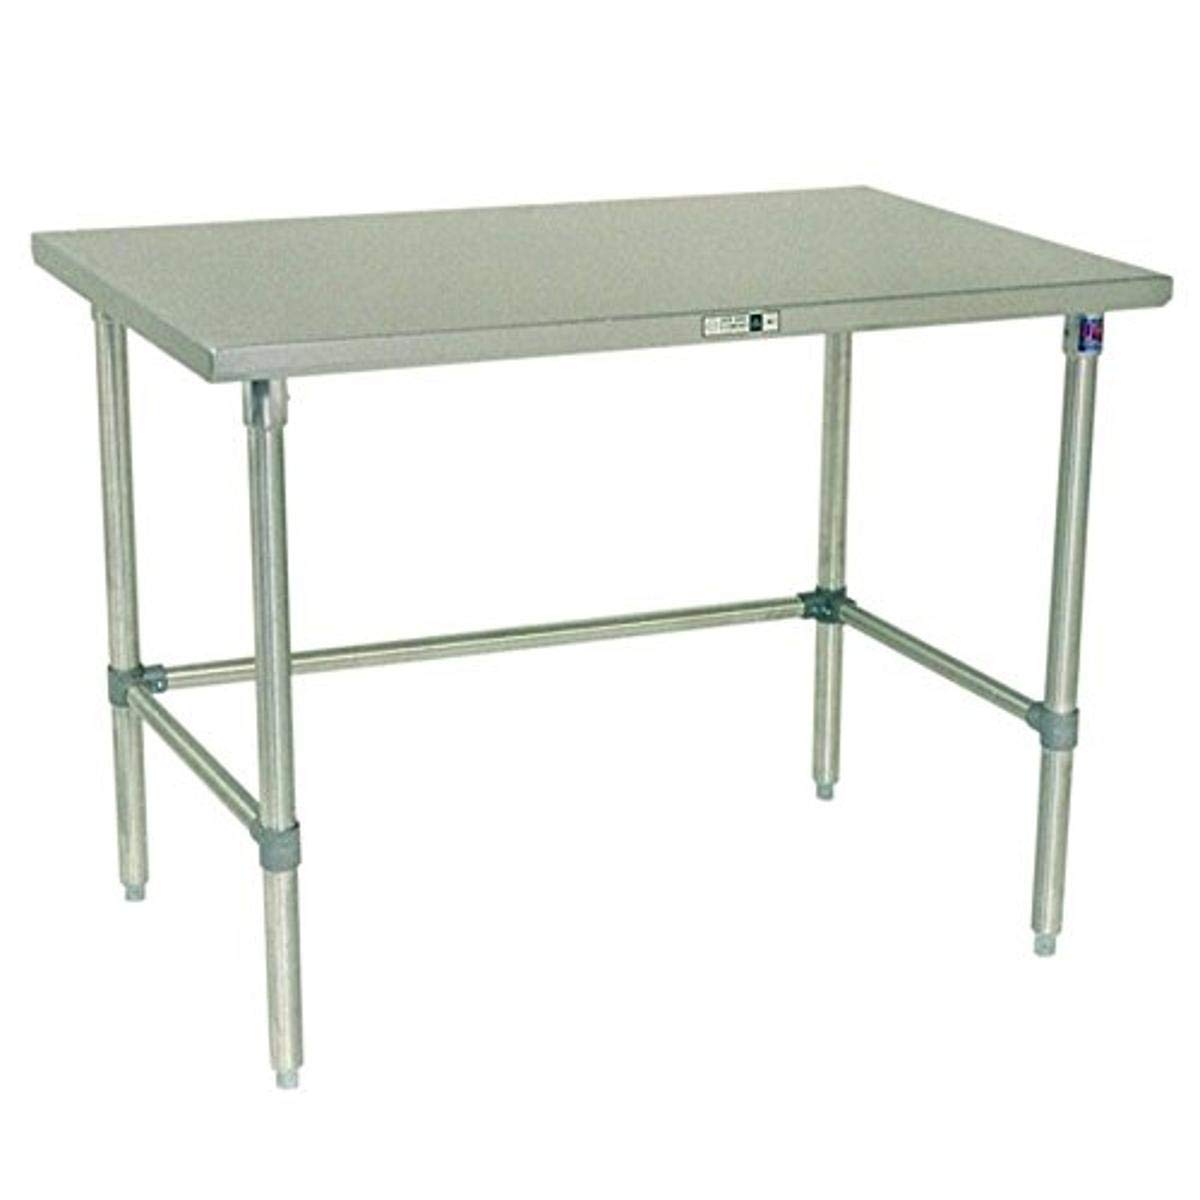 John Boos ST6-2436GBK 16 Gauge Stainless Steel Work Table with Galvanized Base and Bracing, 36" x 24"